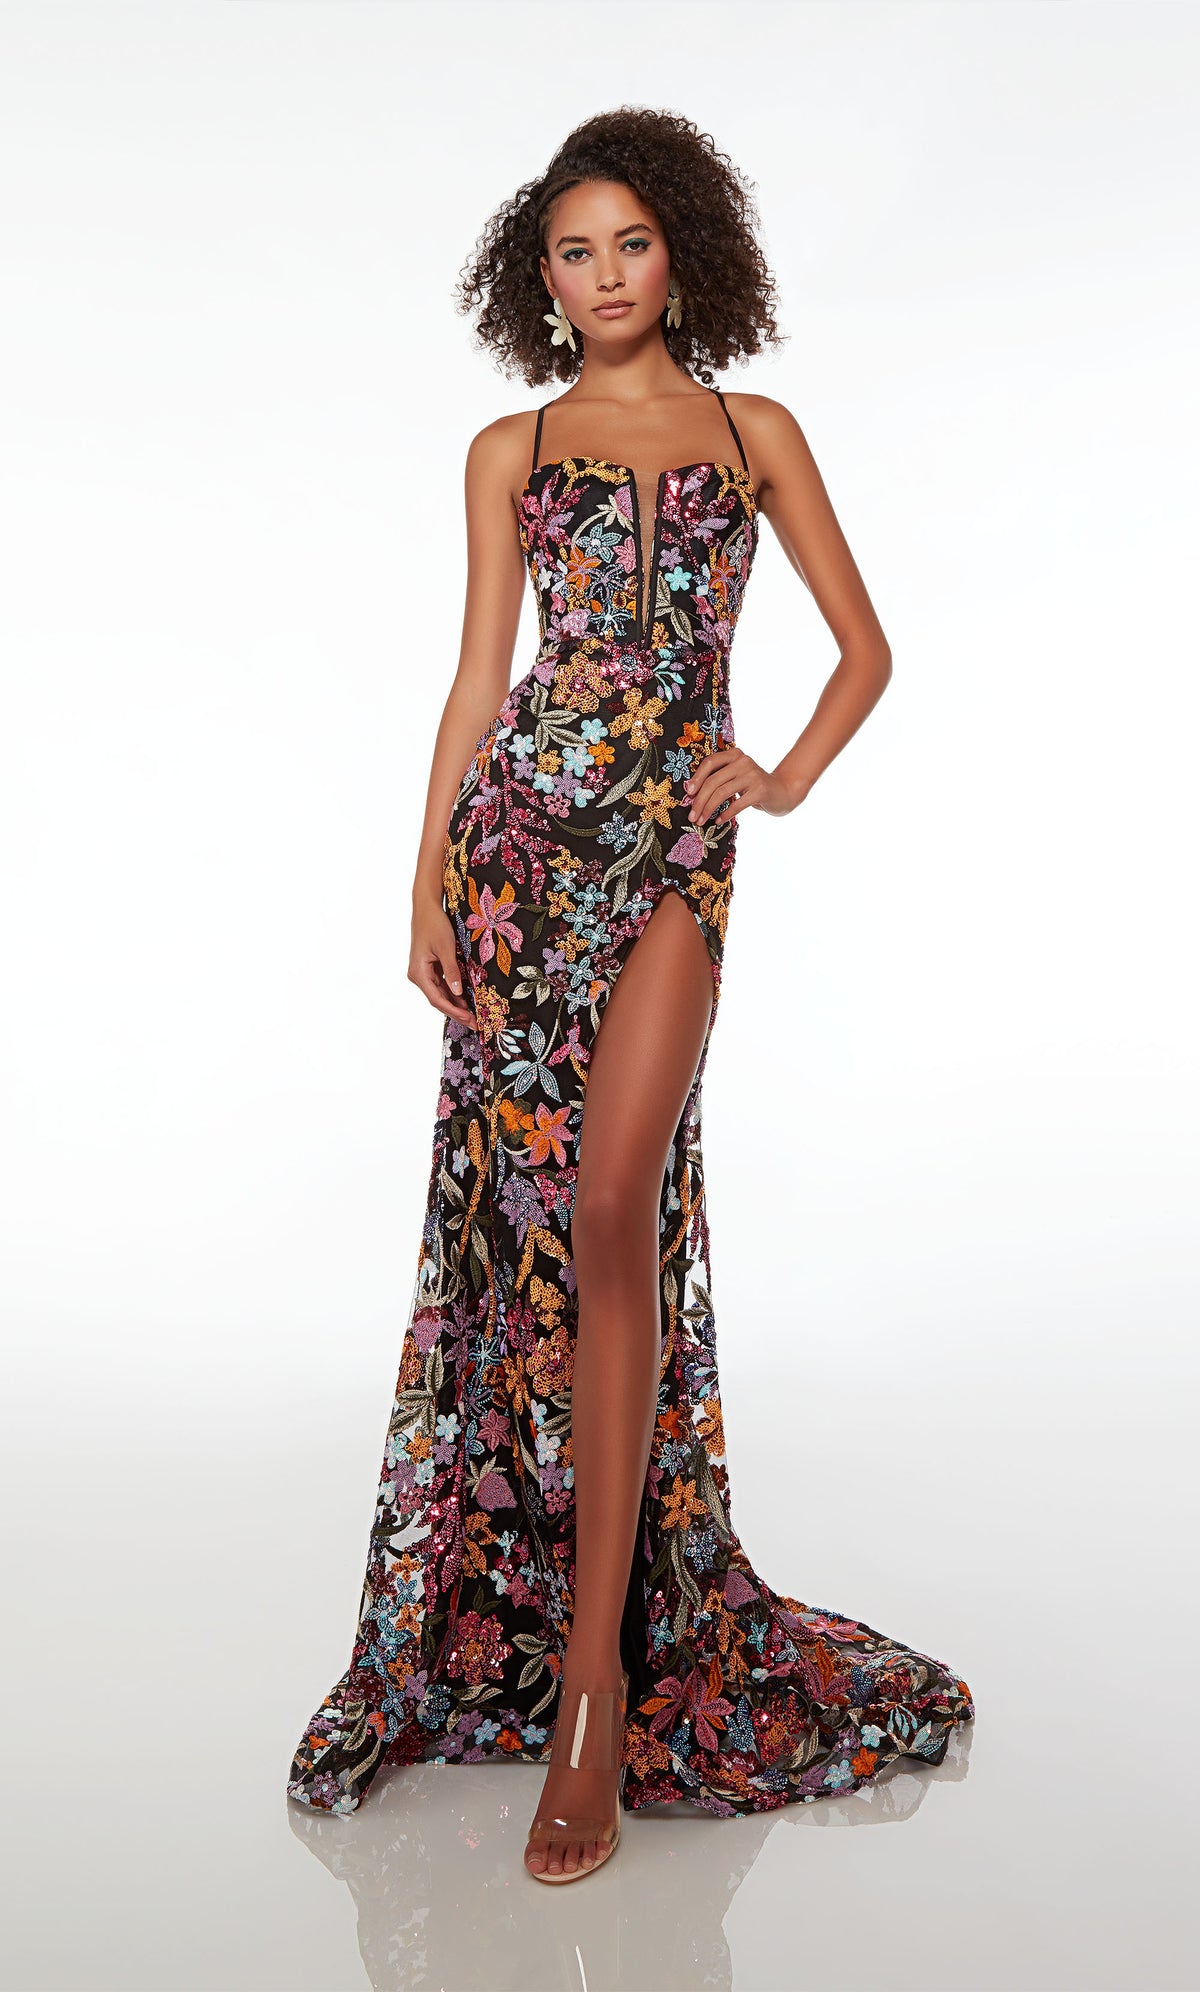 Black fitted formal dress adorned with colorful sequined flowers, featuring an plunging neckline, high side slit, crisscross lace-up back, and an train.